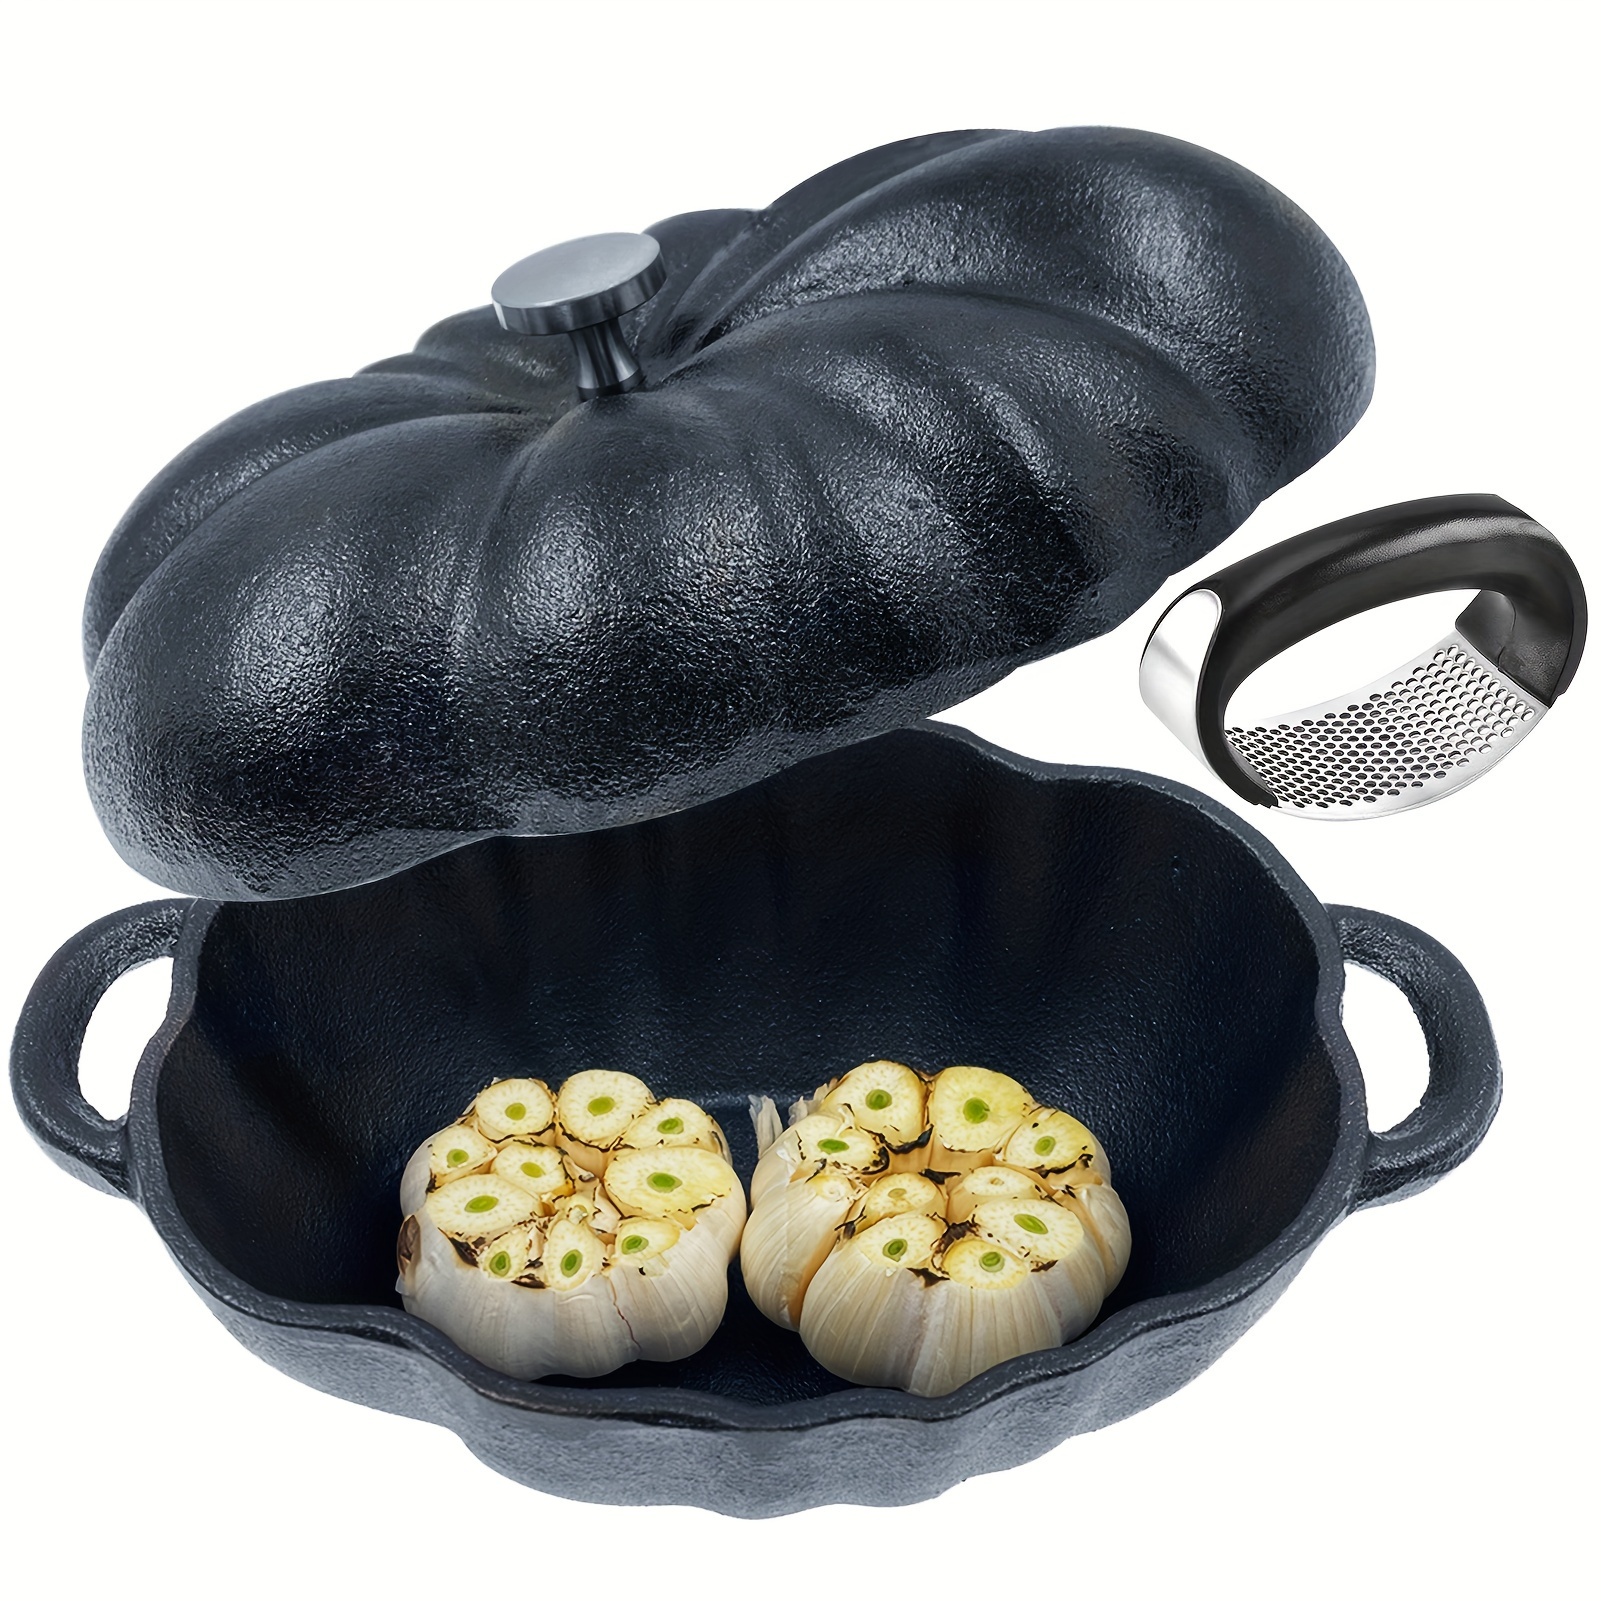 Charcoal Companion Cast Iron Garlic Roaster and Squeezer Set